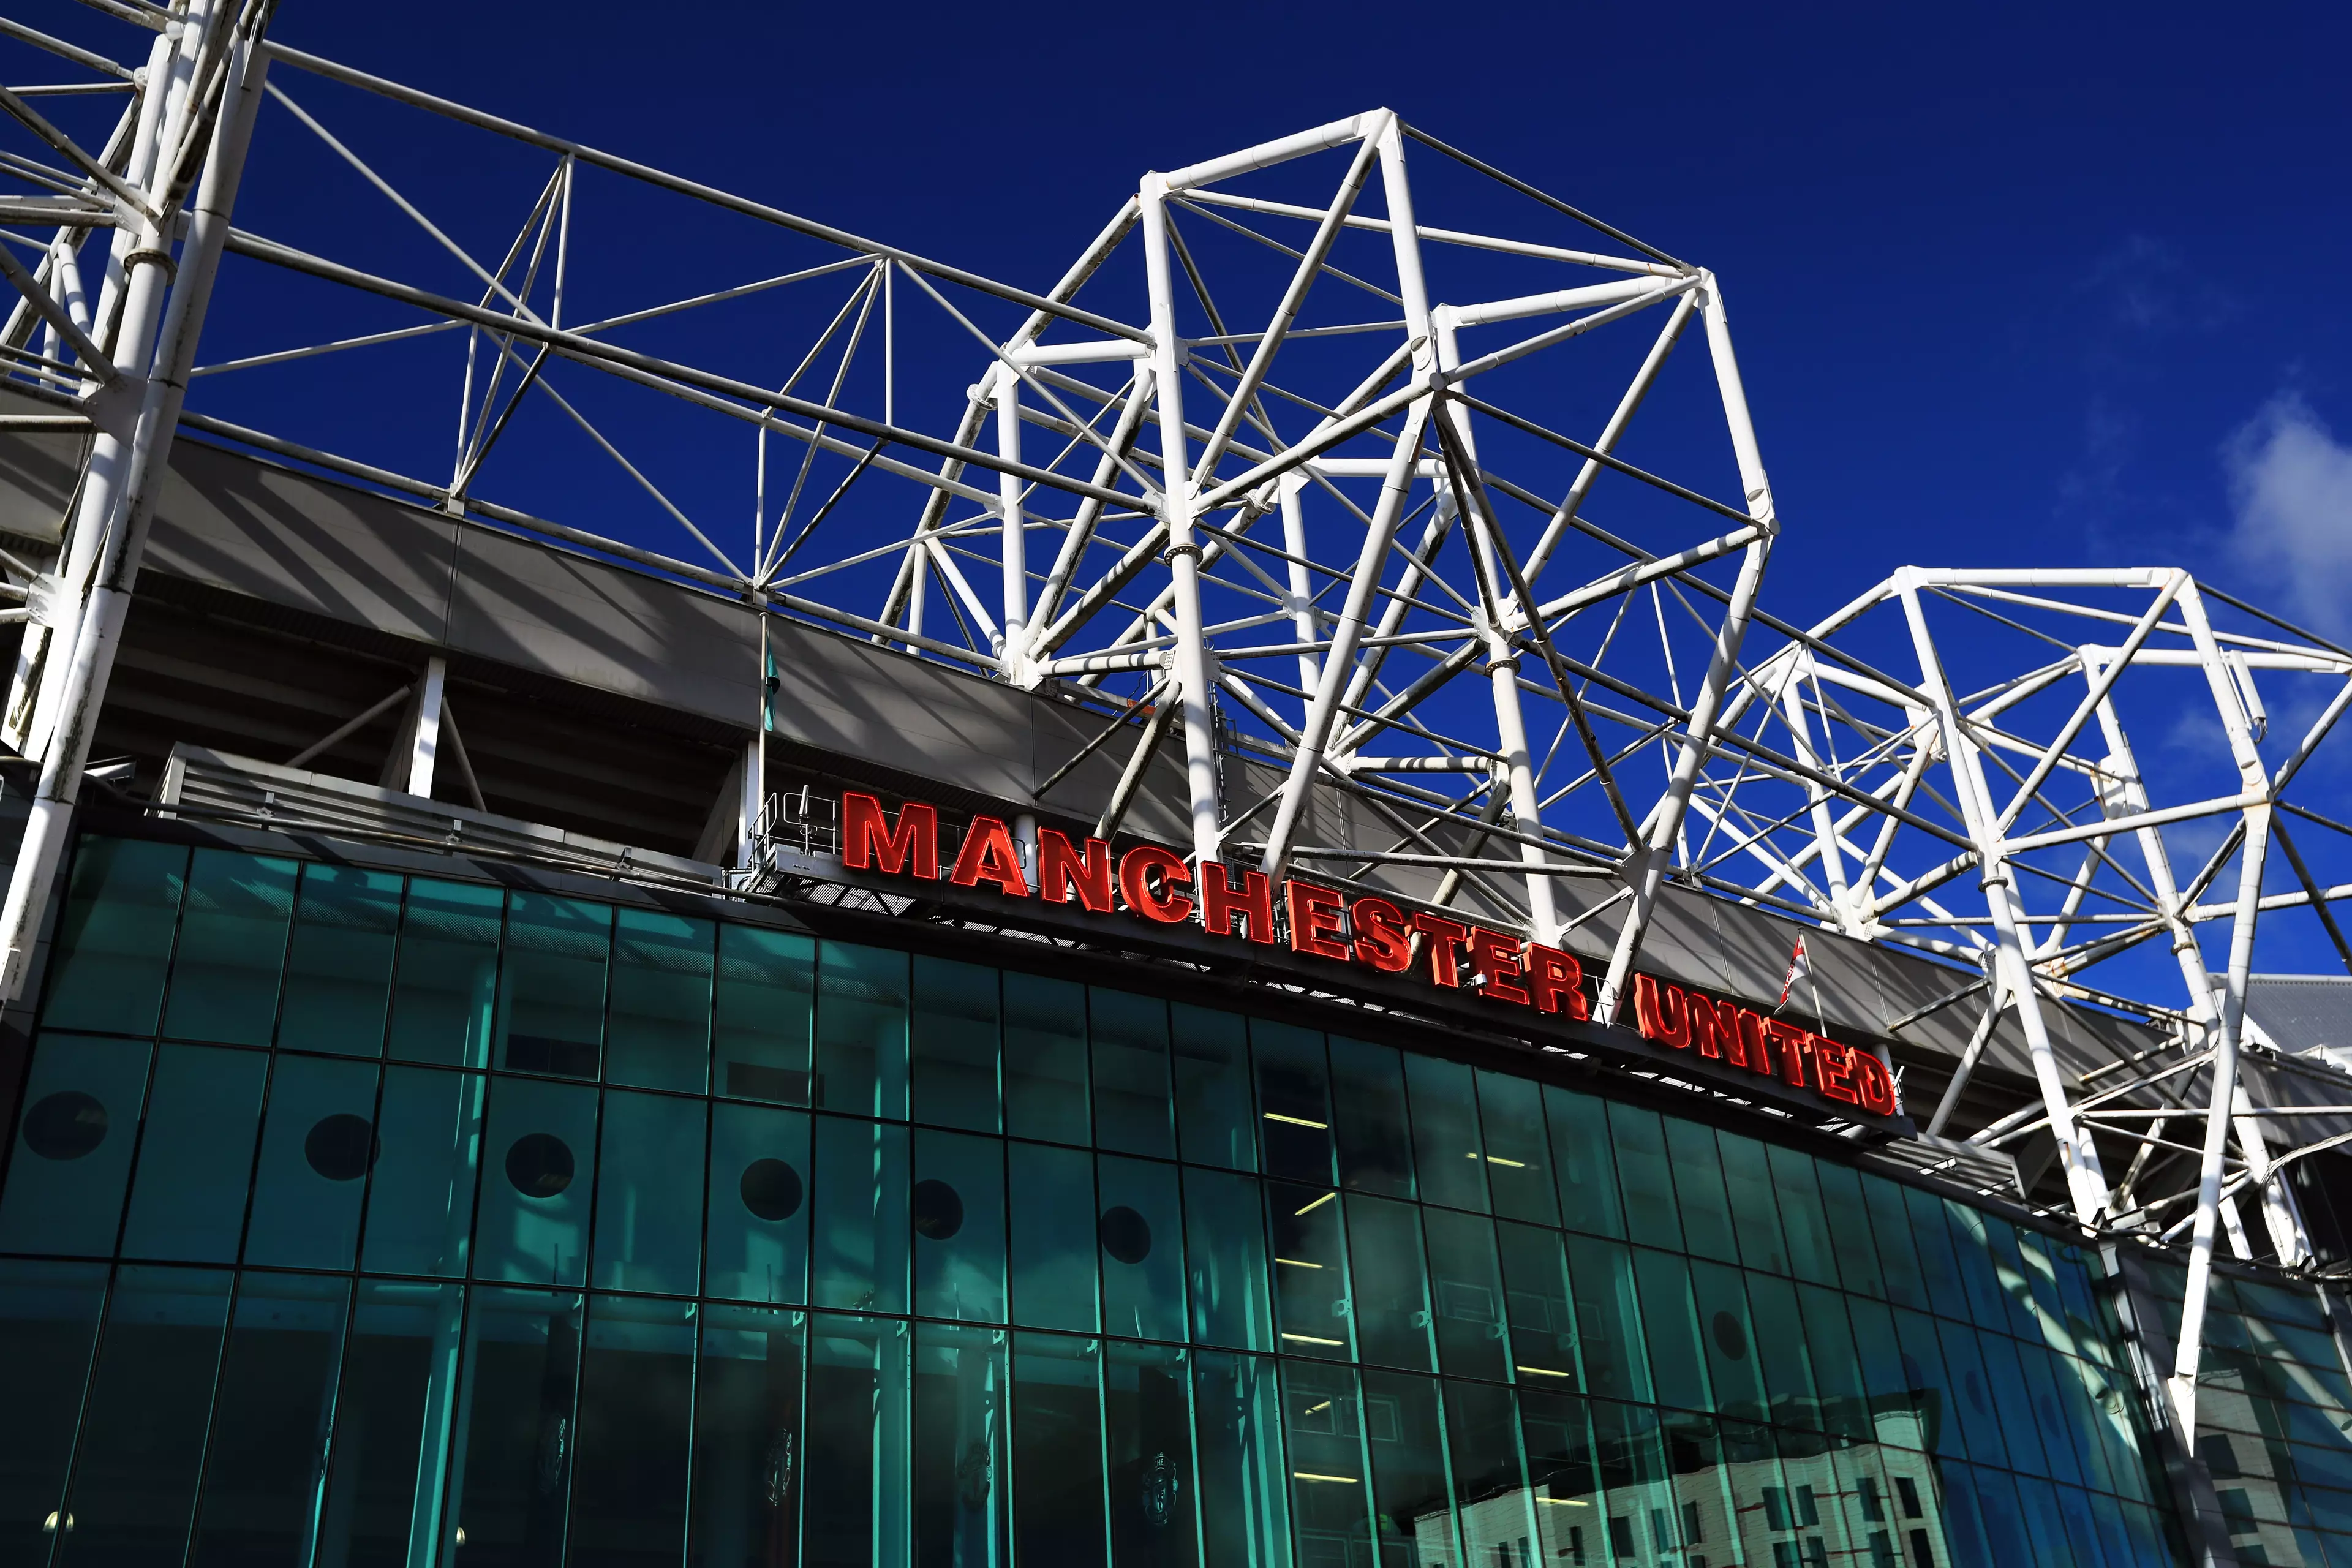 Manchester United Employees Handed £1,000's Worth Of Shares In The Club